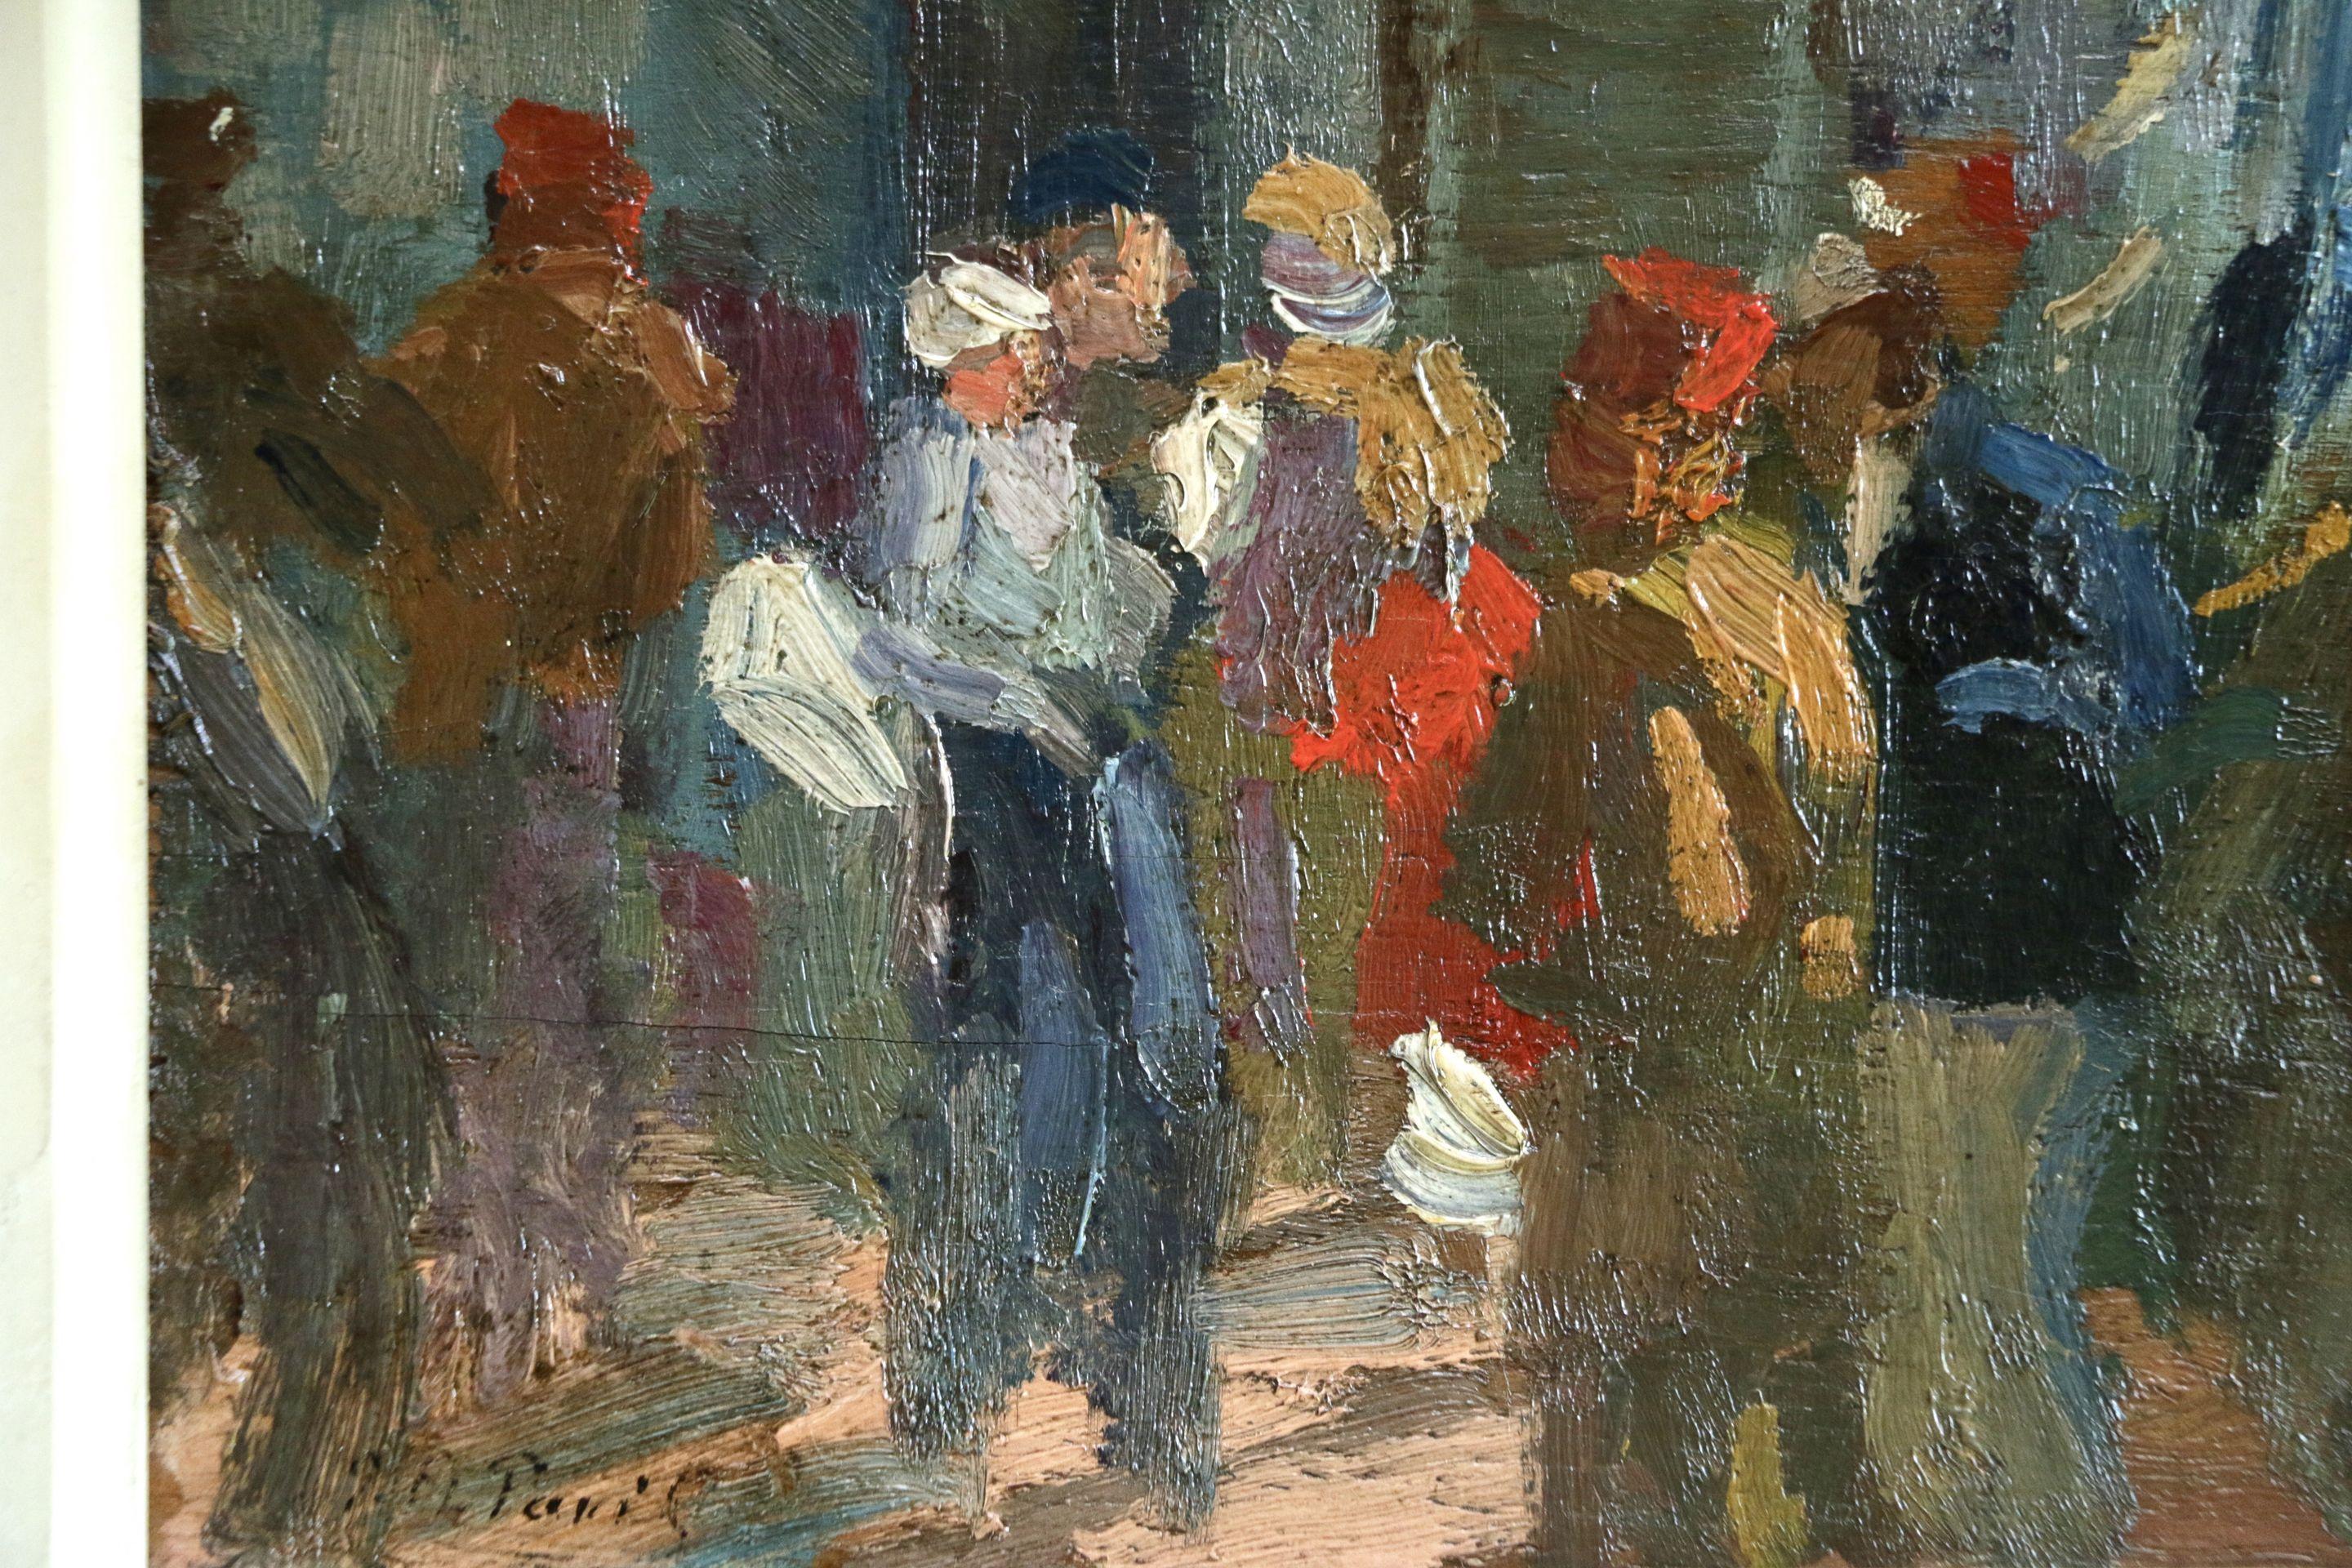 L'Embarquement - 19th Century Oil, Figures Boarding Boat at Sea by Elie Pavil - Gray Figurative Painting by Elie Anatole Pavil